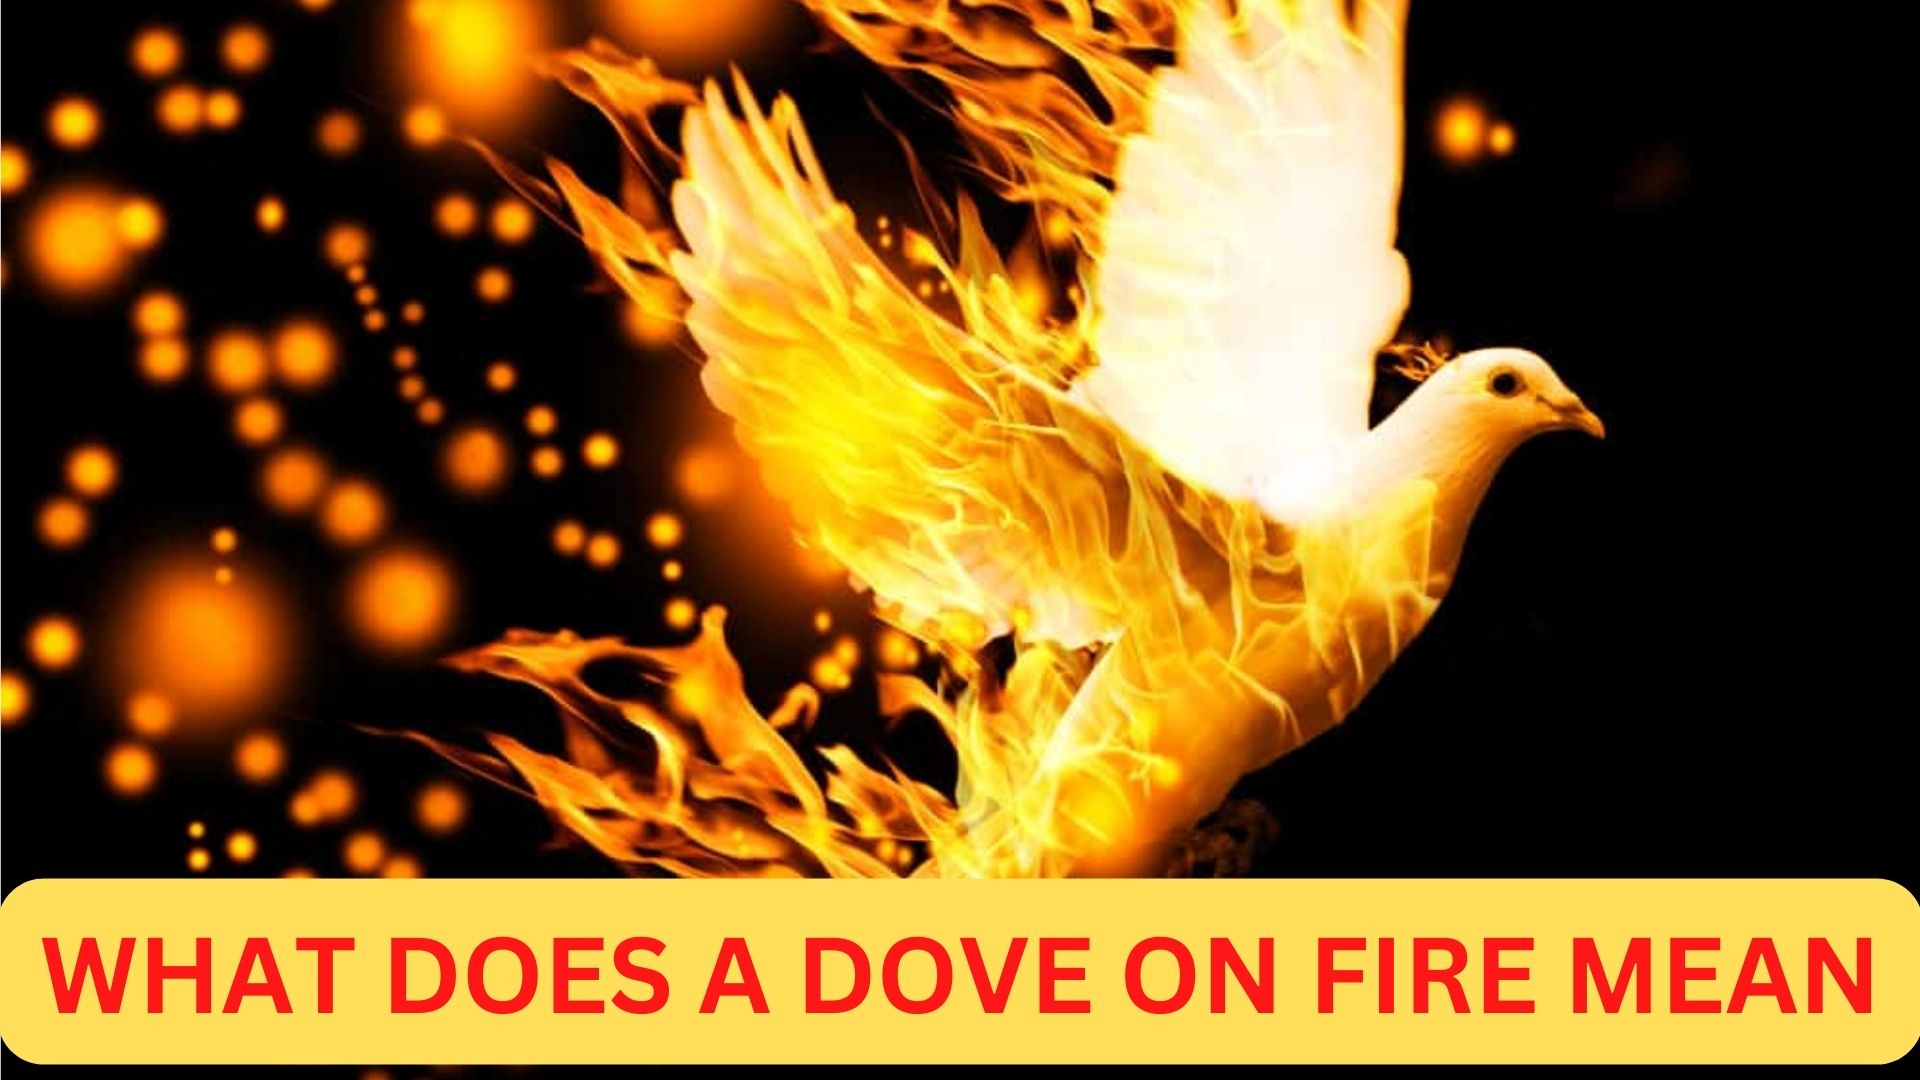 What Does A Dove On Fire Mean? It Represents Enlightenment